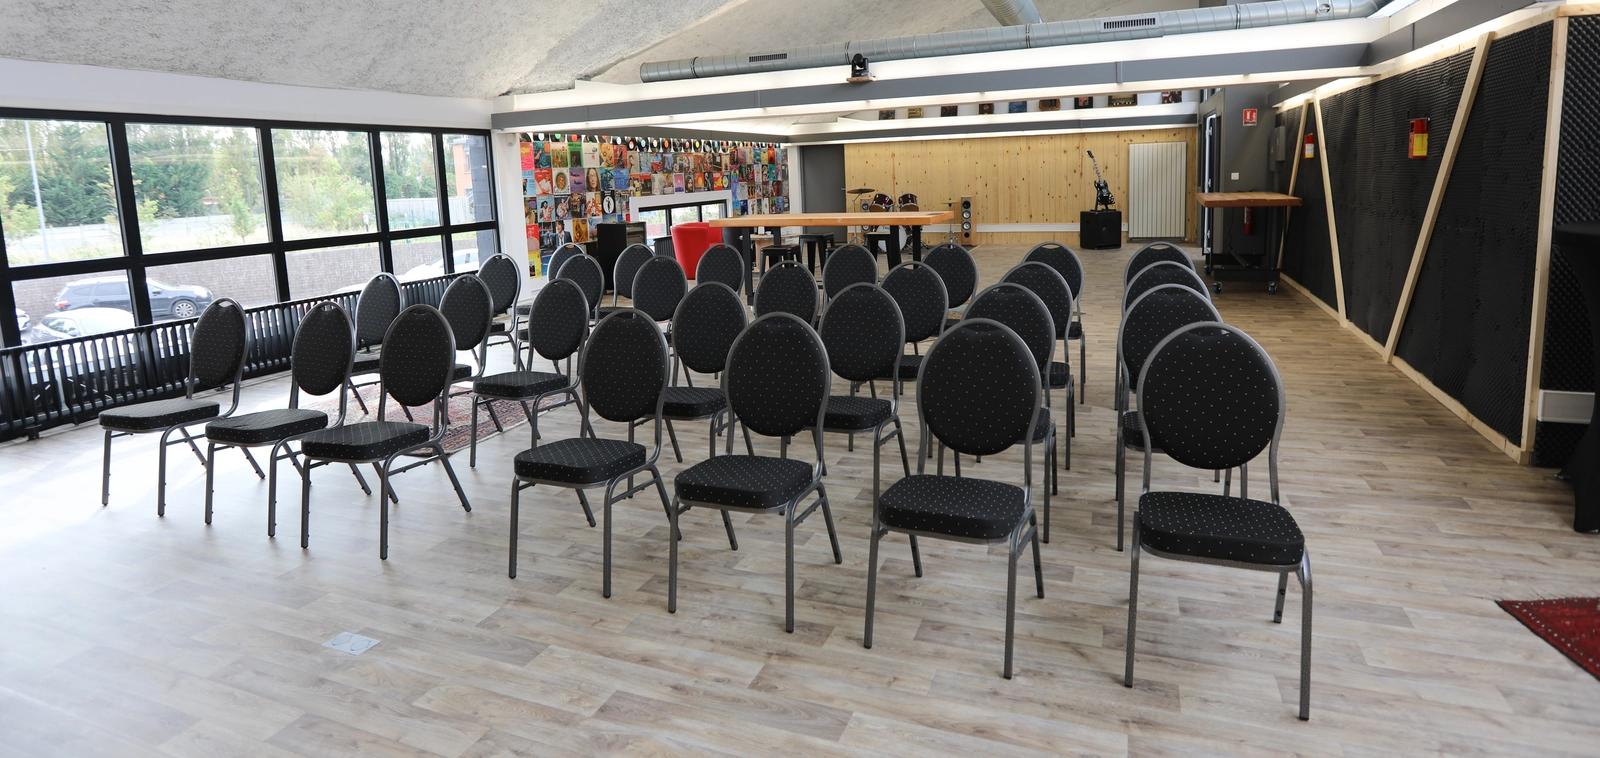 Space L'universal: Large, bright meeting room - 5